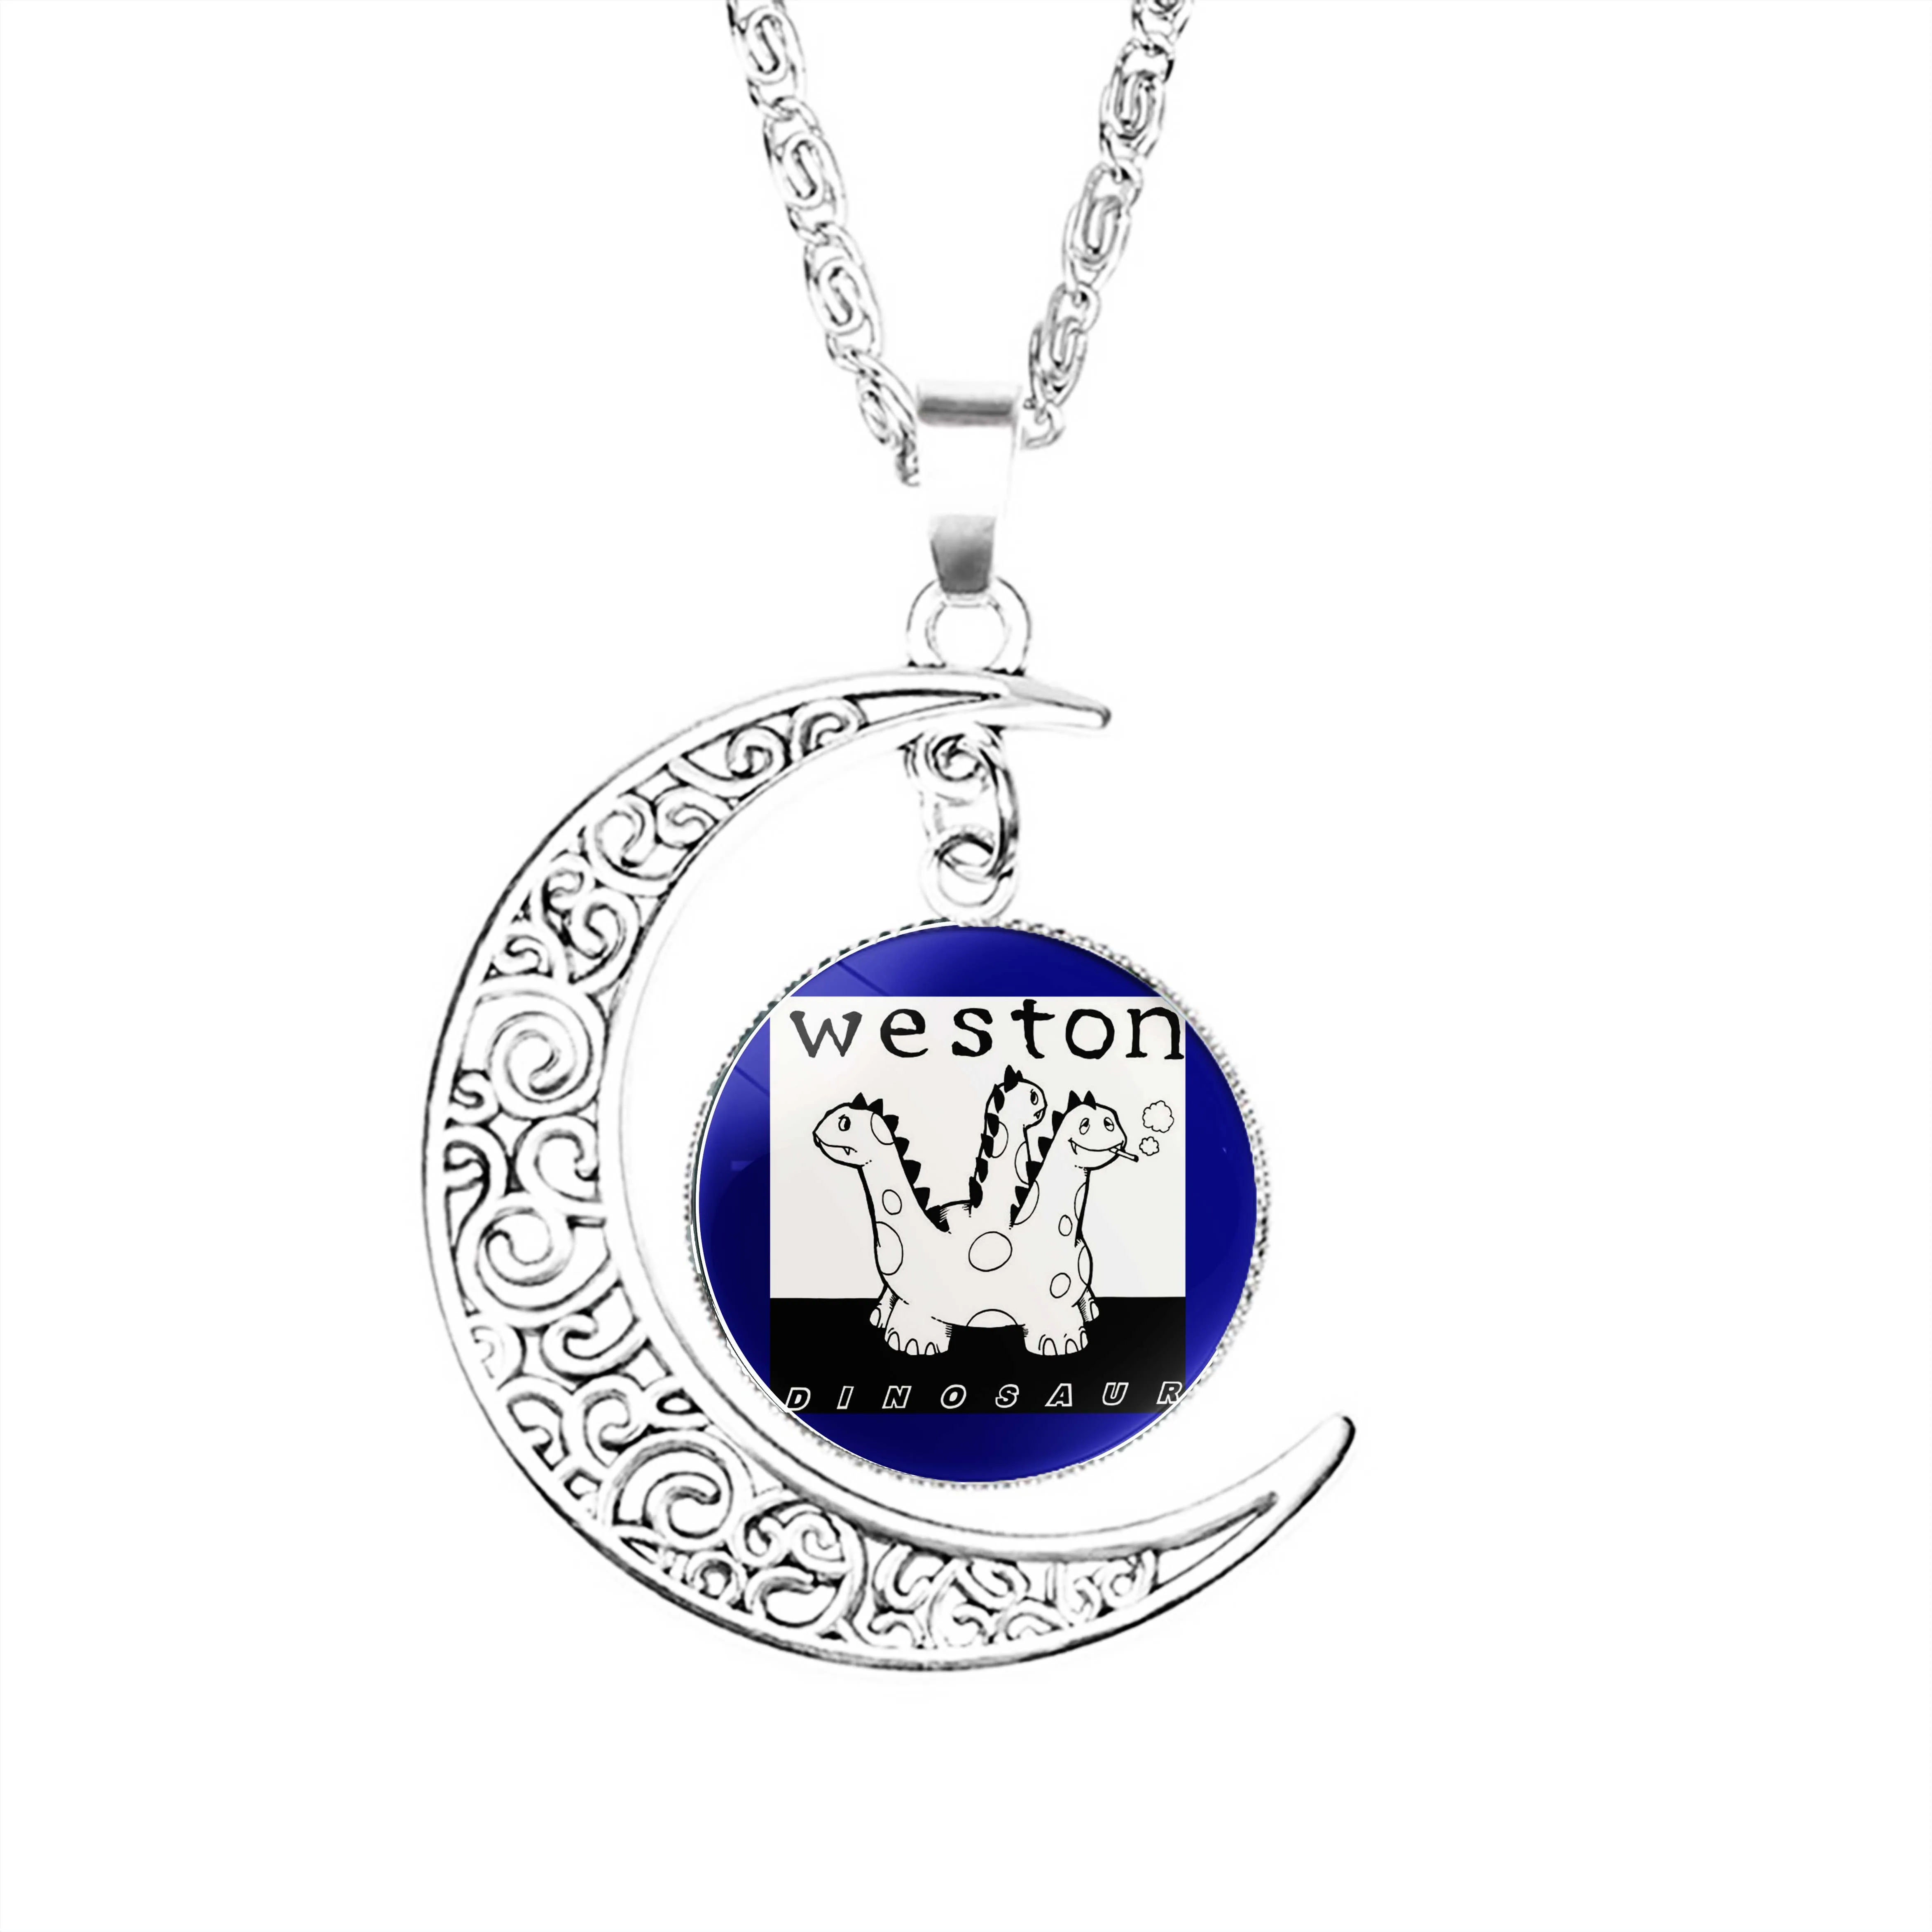 

Weston Moon Necklace Girls Jewelry Lovers Dome Stainless Steel Fashion Women Boy Gifts Glass Crescent Jewelry Lady Men Charm